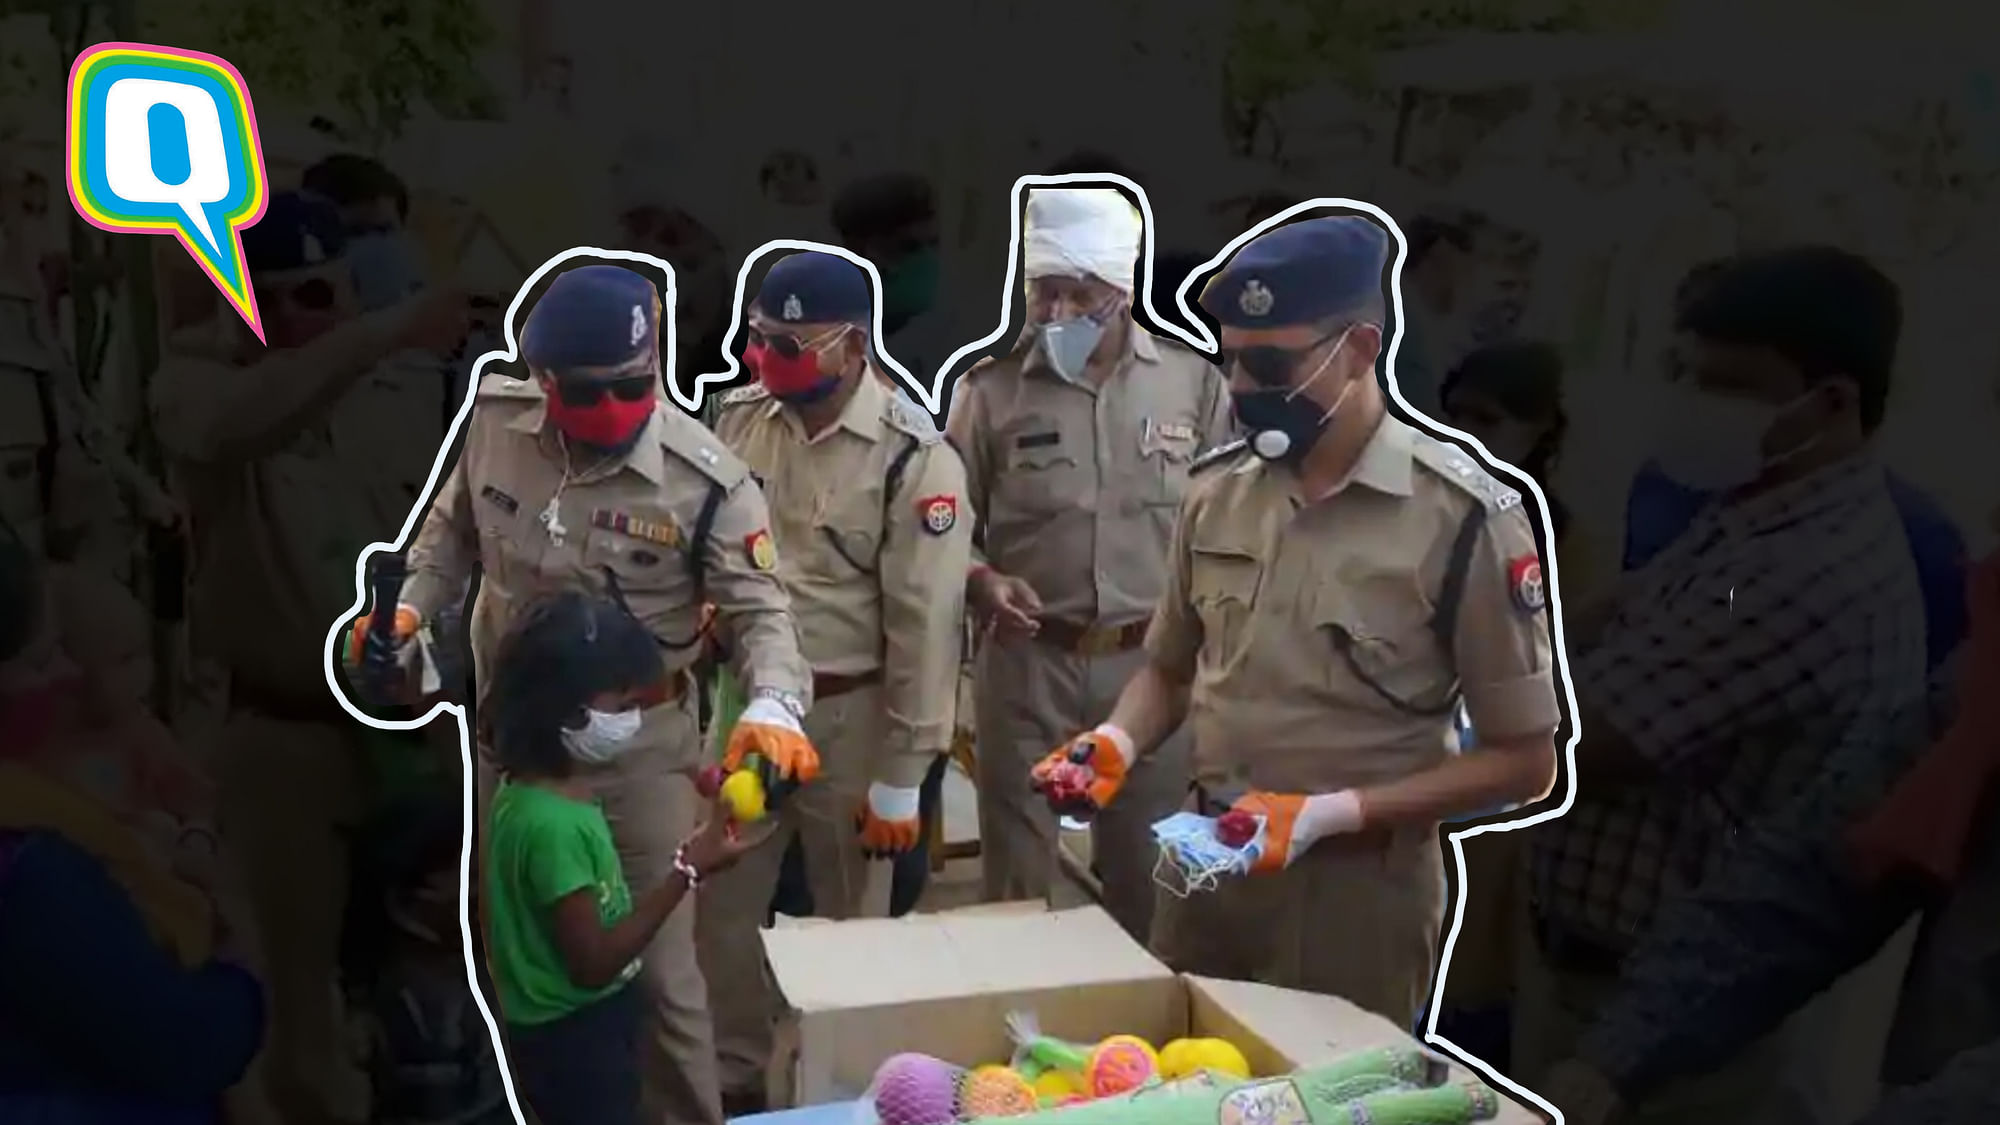 Jhansi Police officers distributing masks and toys to migrant children.